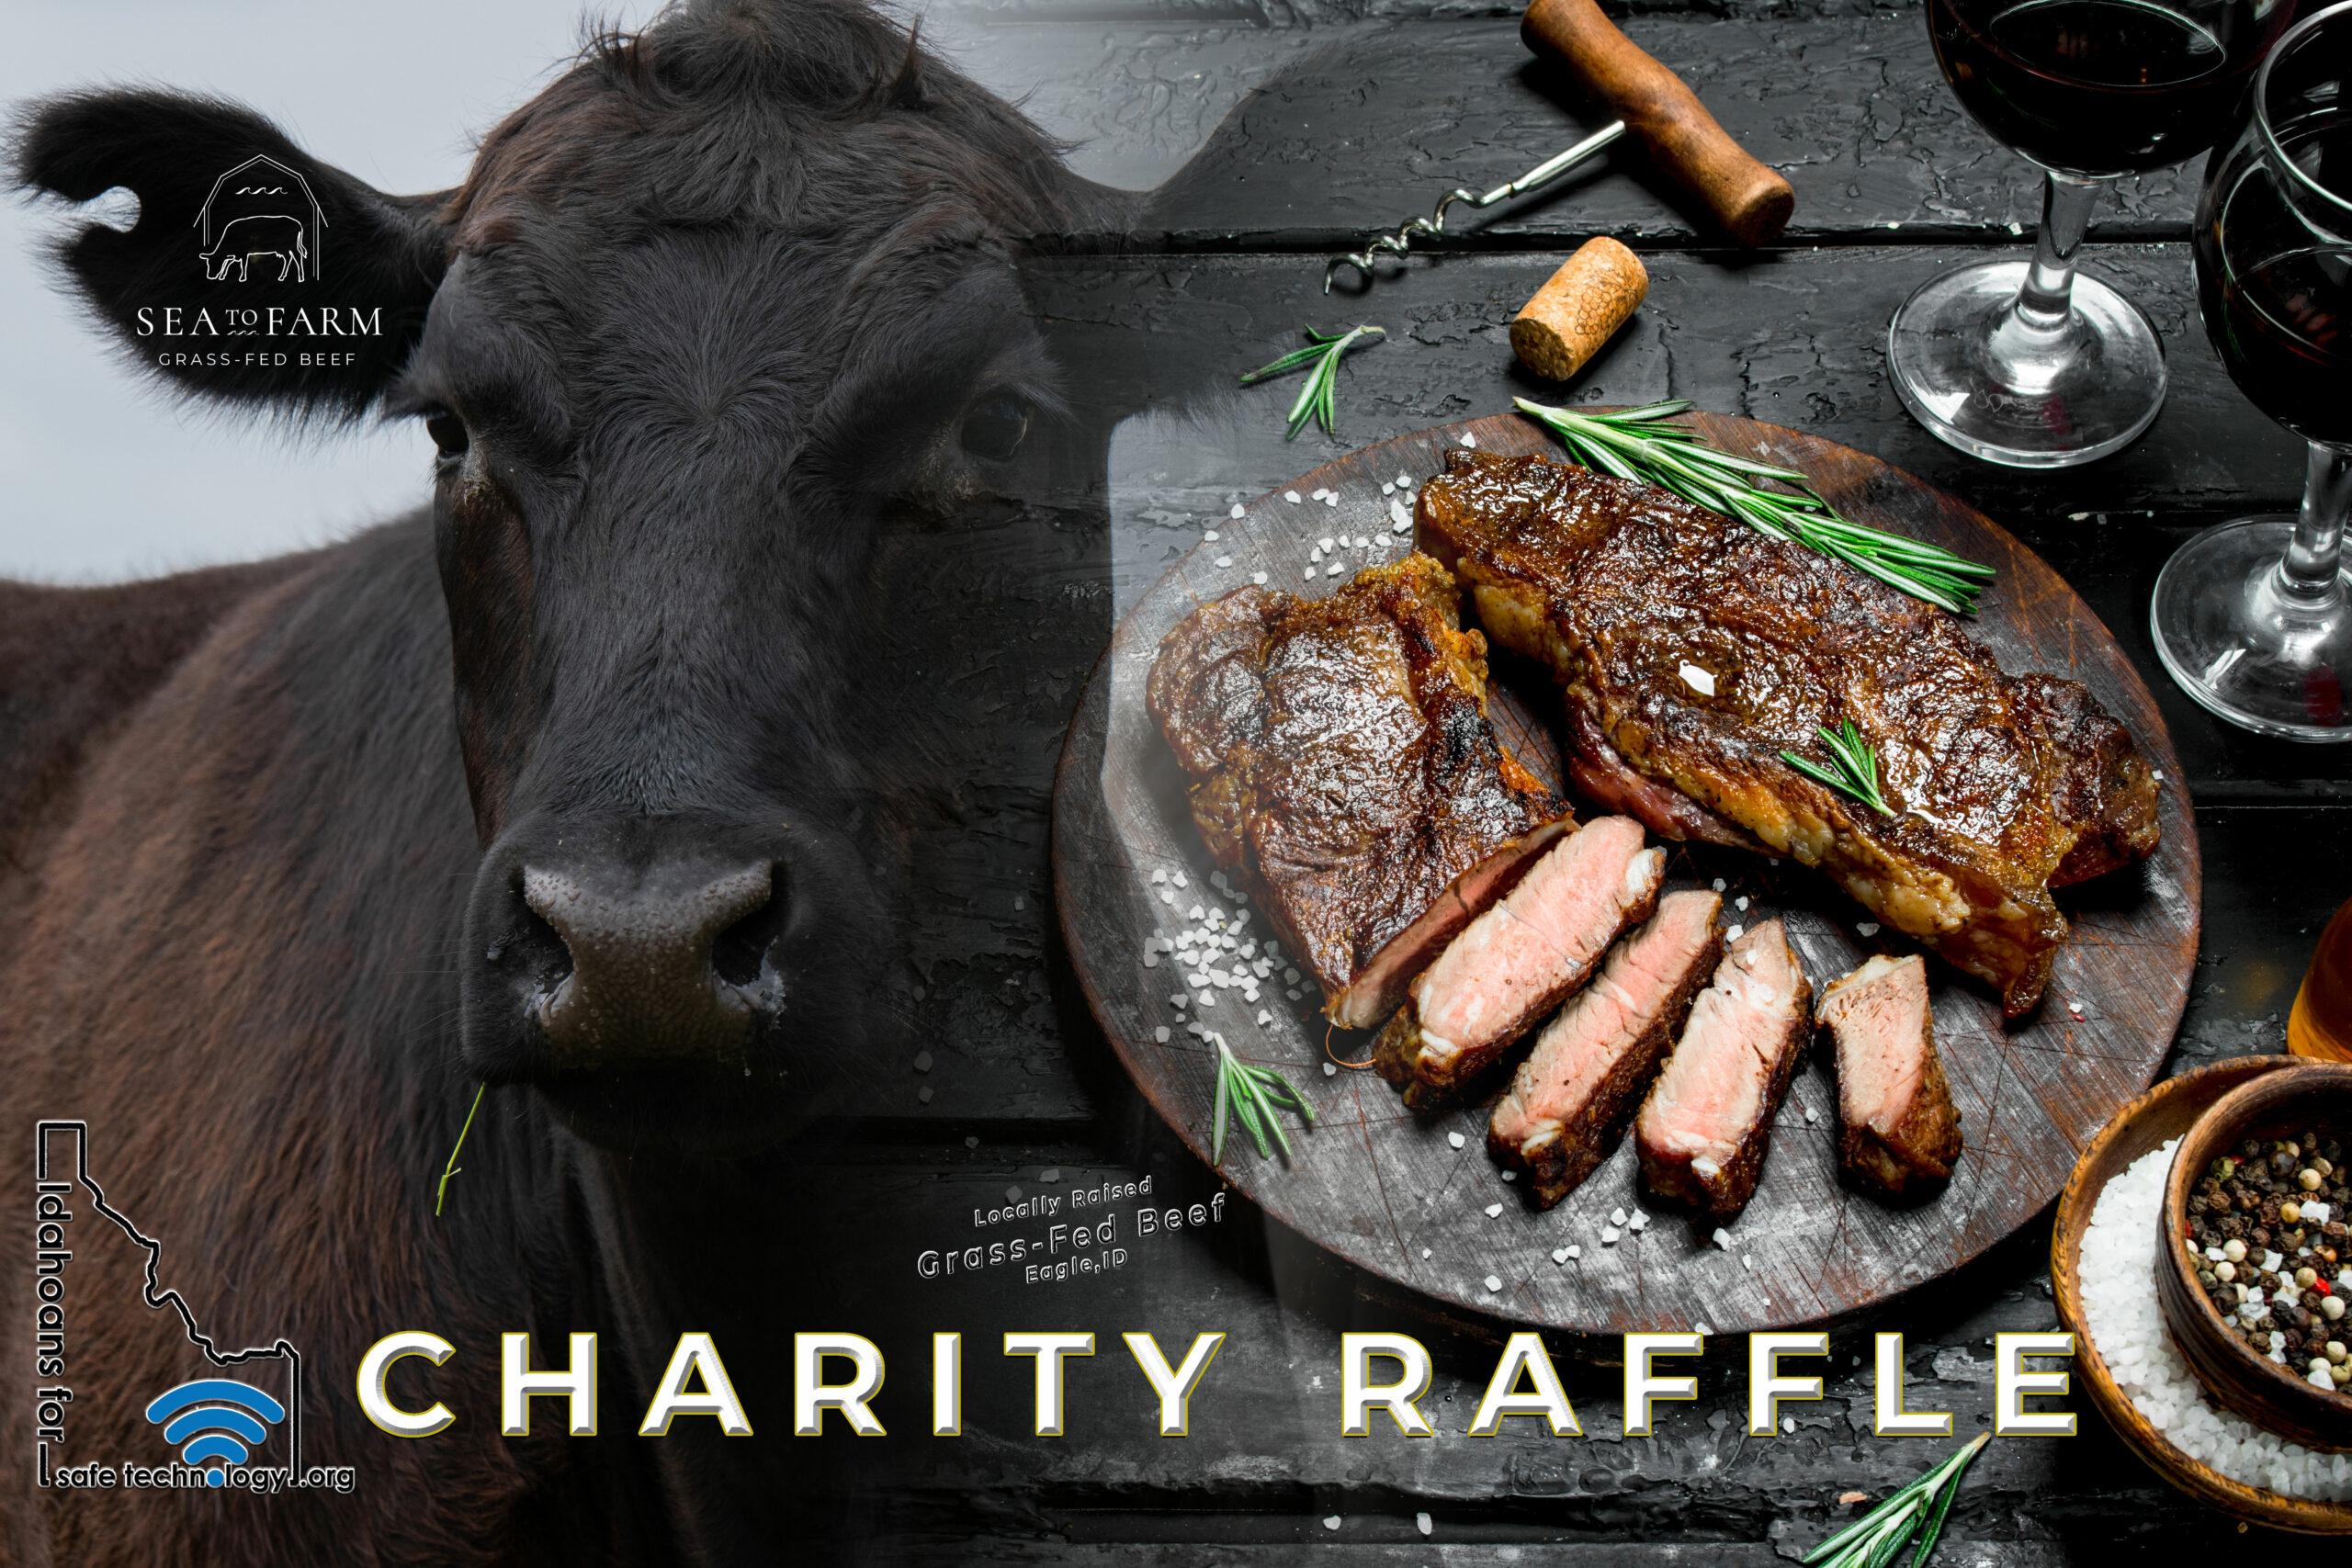 Grass-Fed Beef for Charity Raffle